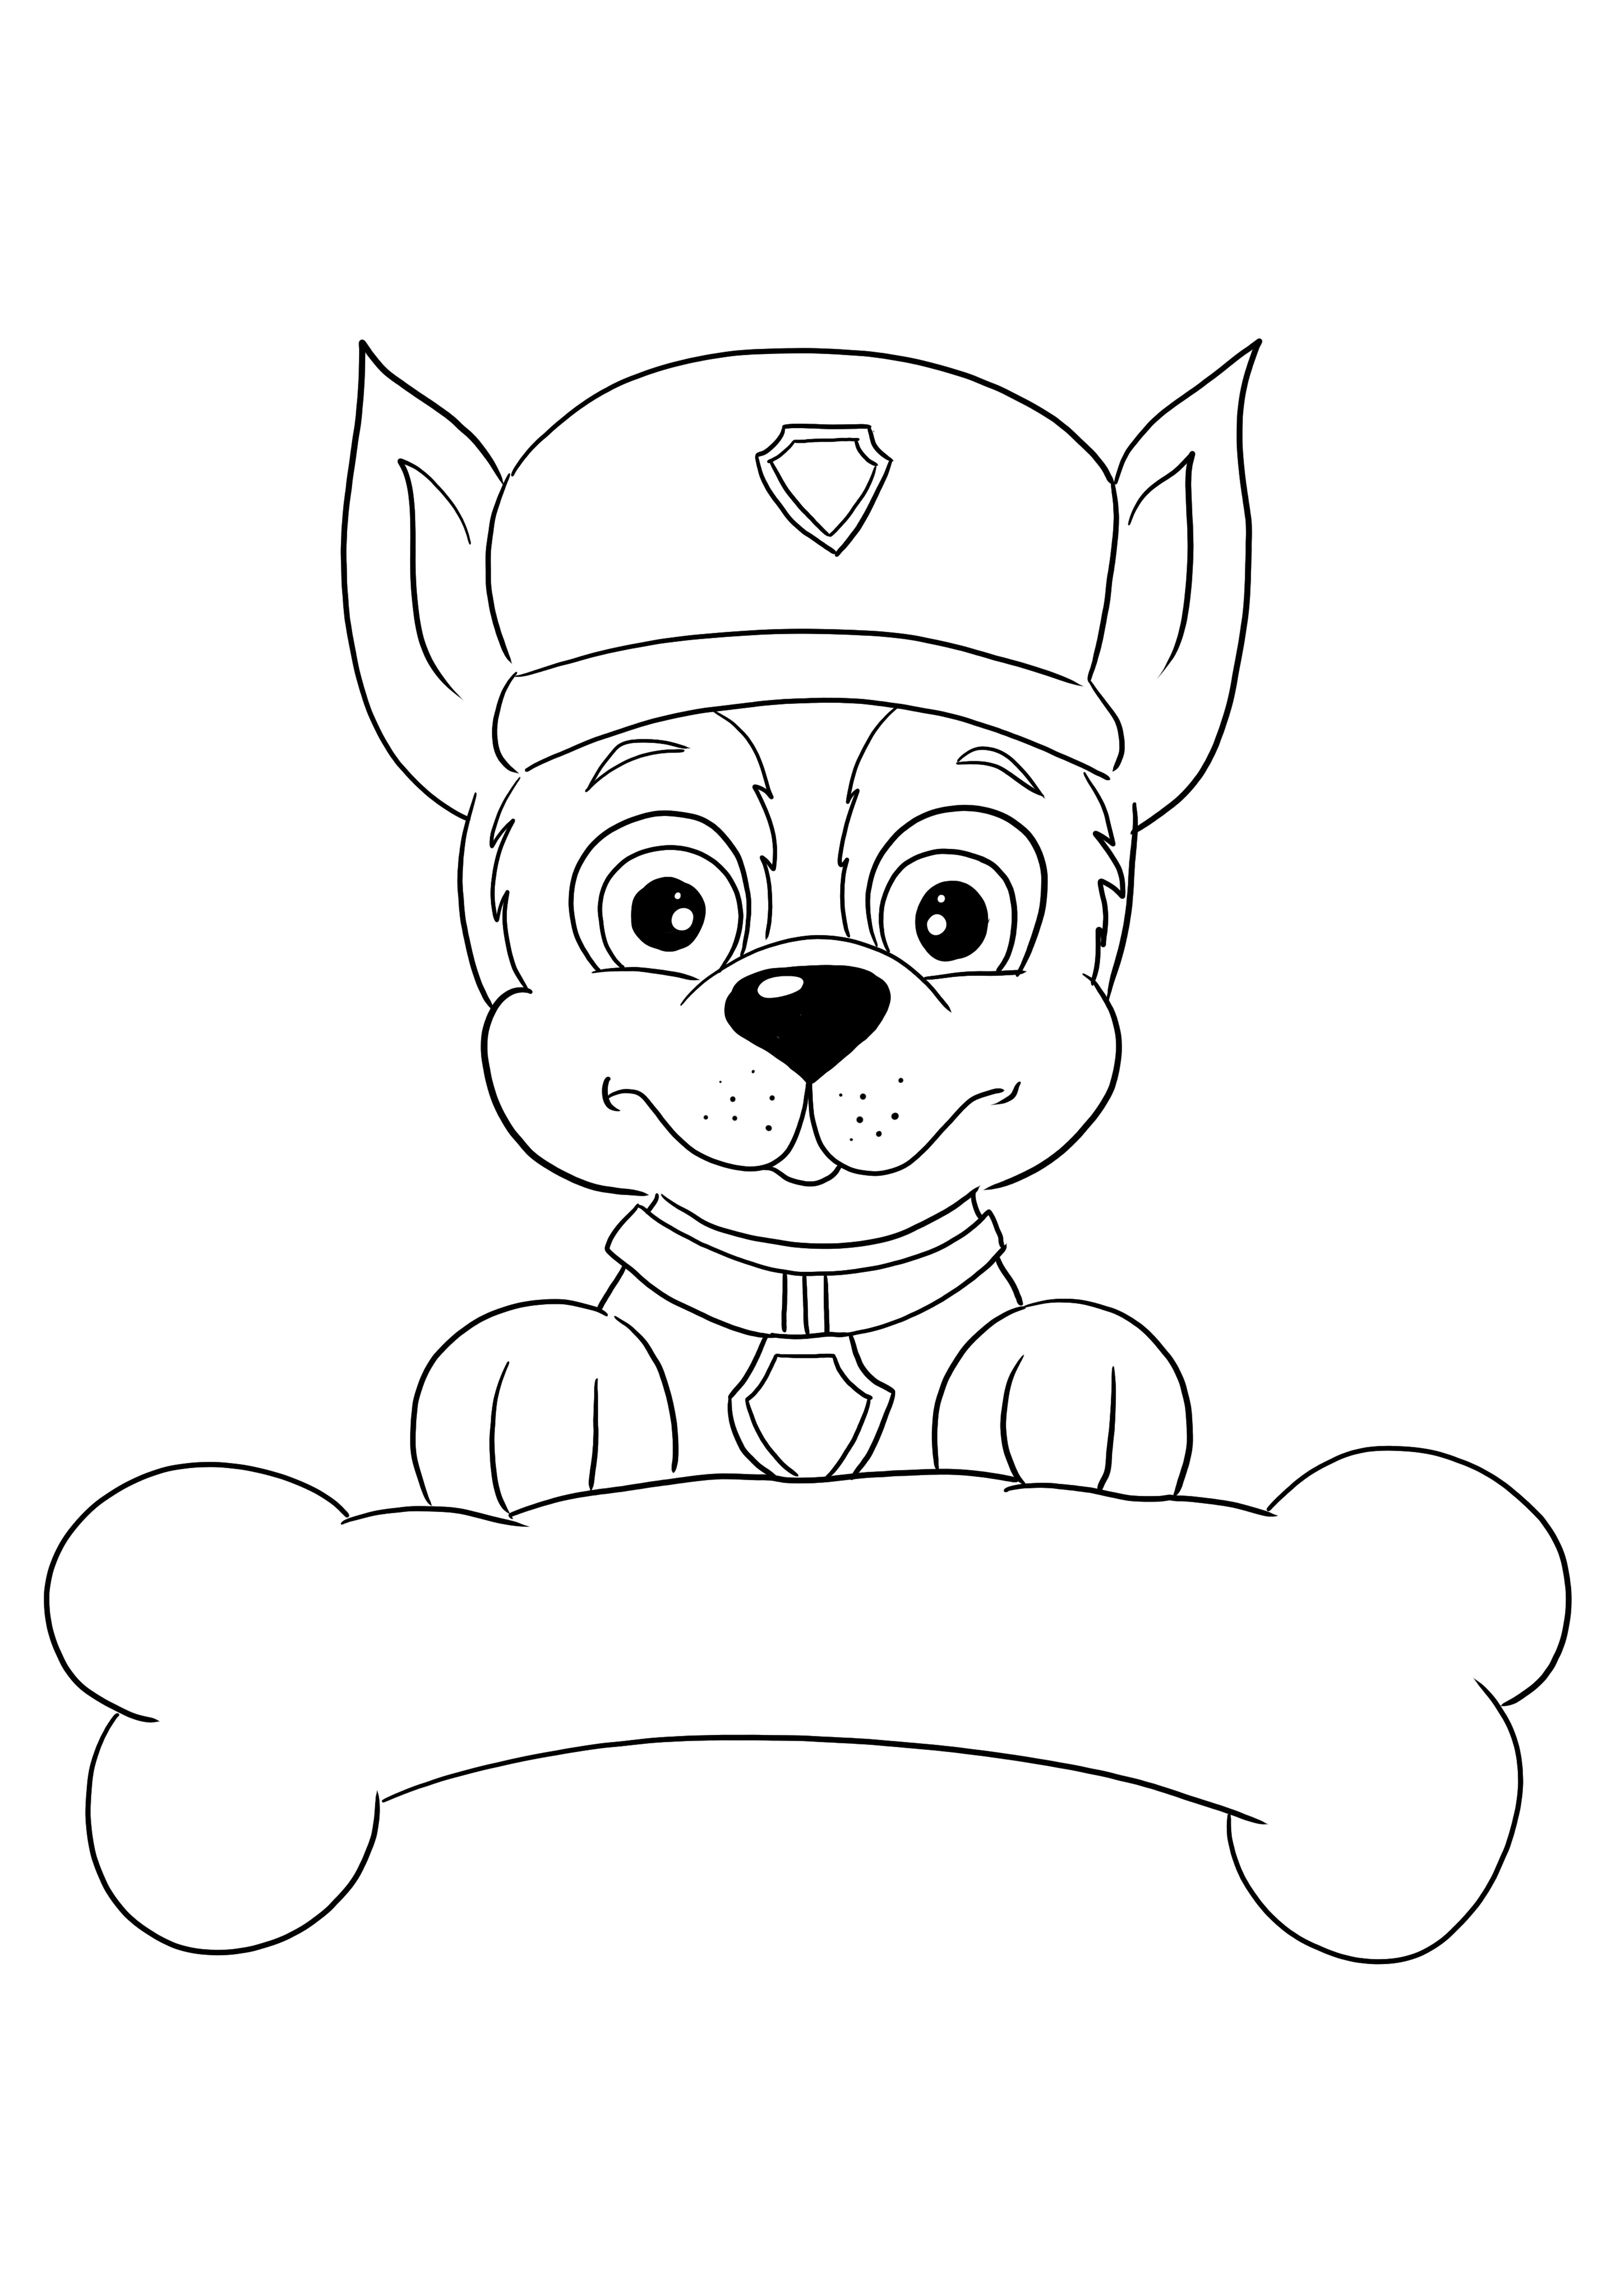 Chase from Paw Patrol coloring sheet for free downloading and easy coloring